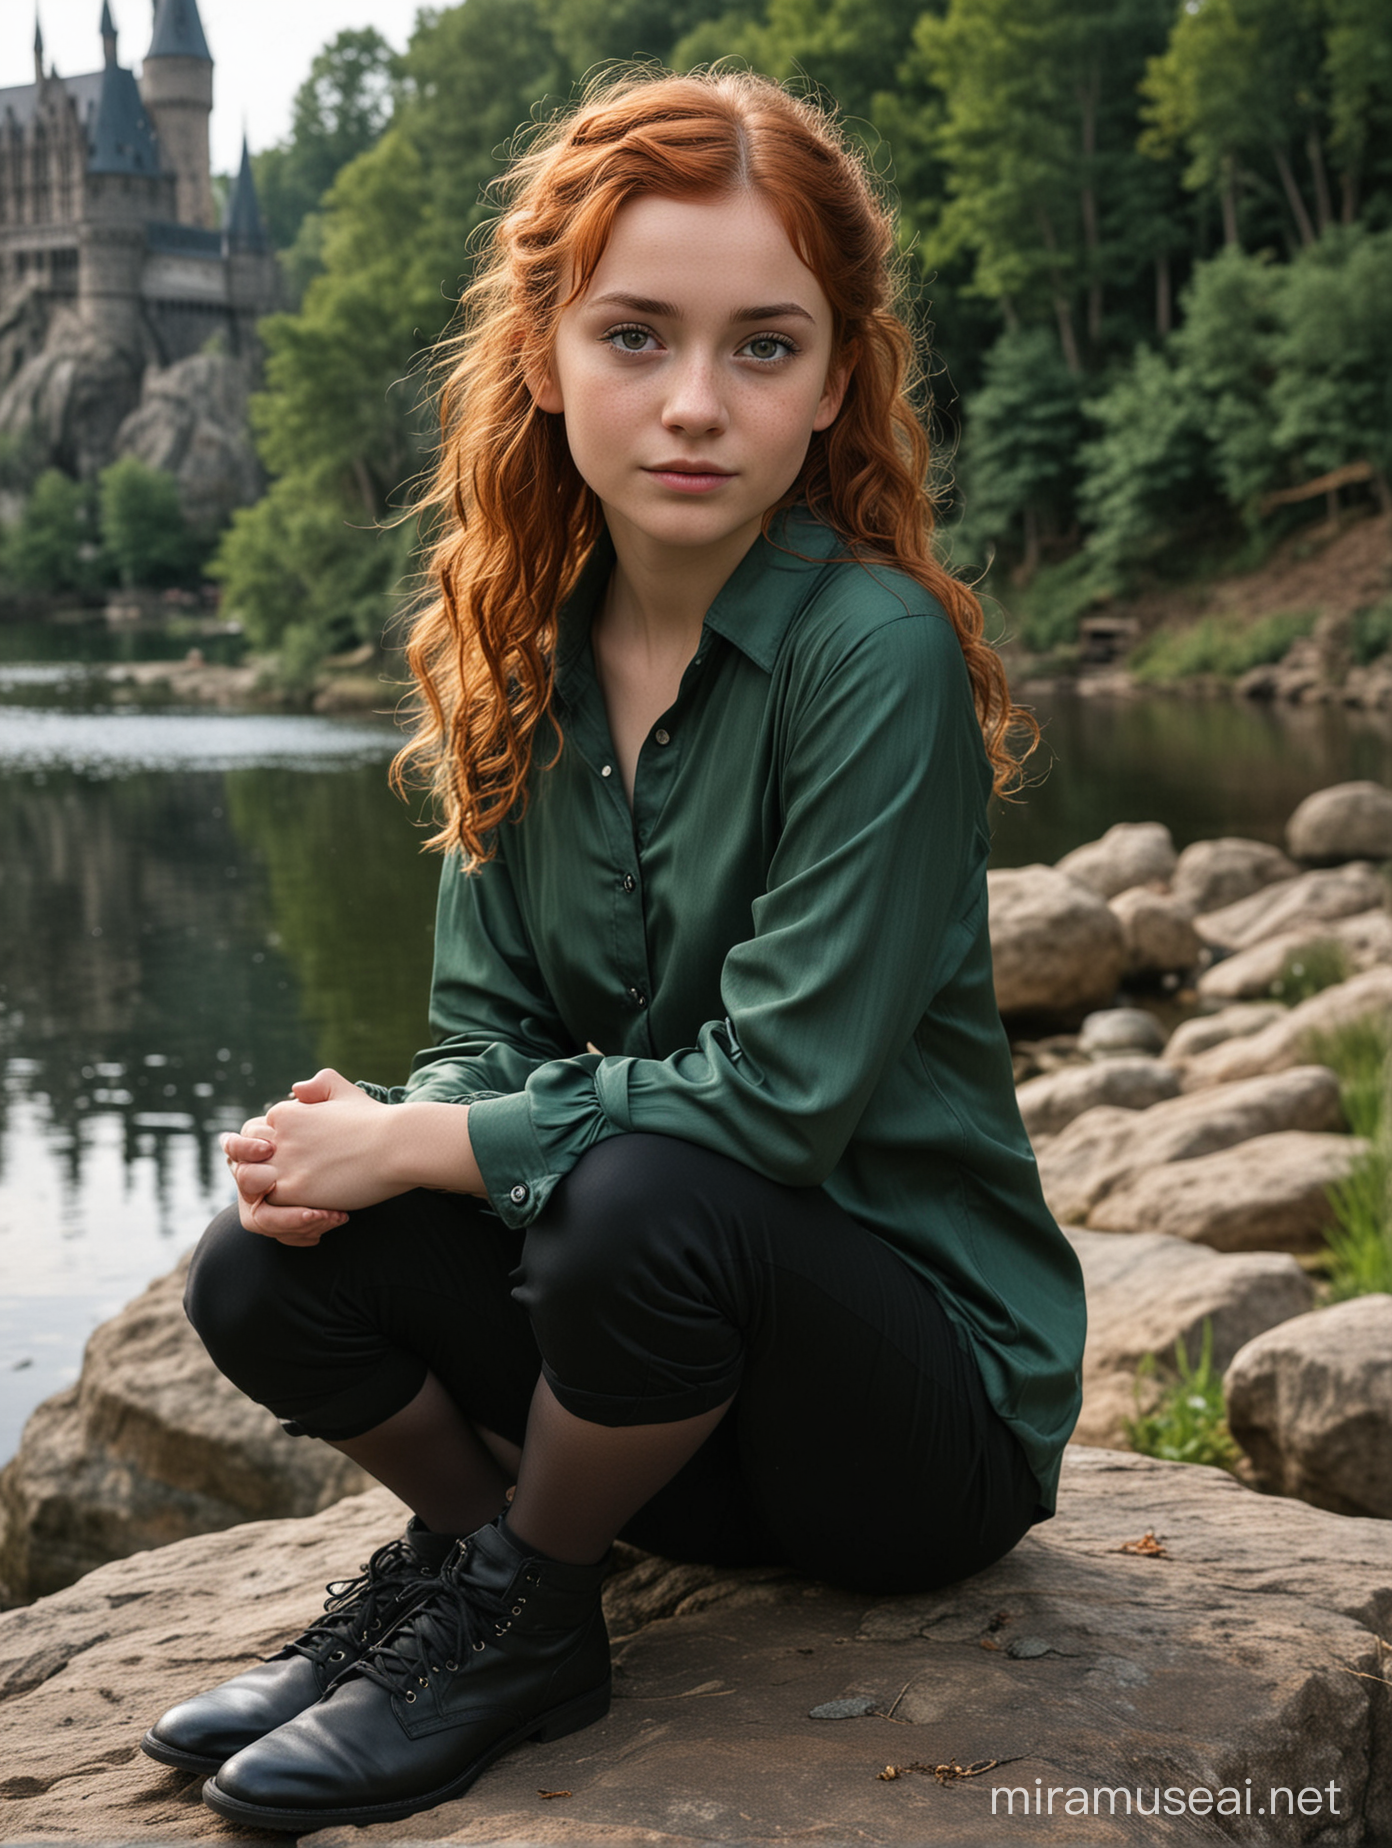 I want a picture of a very young girl (show full body) sitting on a rock, behind her is the Black lake from Harry Potter magic world, we can see the Hogwarts castle. The girl is a very young child, eleven years old. She has red curly hair, very short styled in pixie cut (almost boy-ish and messy), they look wild. She has pale thin sharp face, with light freckles and silver-gray eyes. Her clothes are elegant, dark green silk shirt and black pants. She is a witch, Hogwarts student and she is in Slytherin.